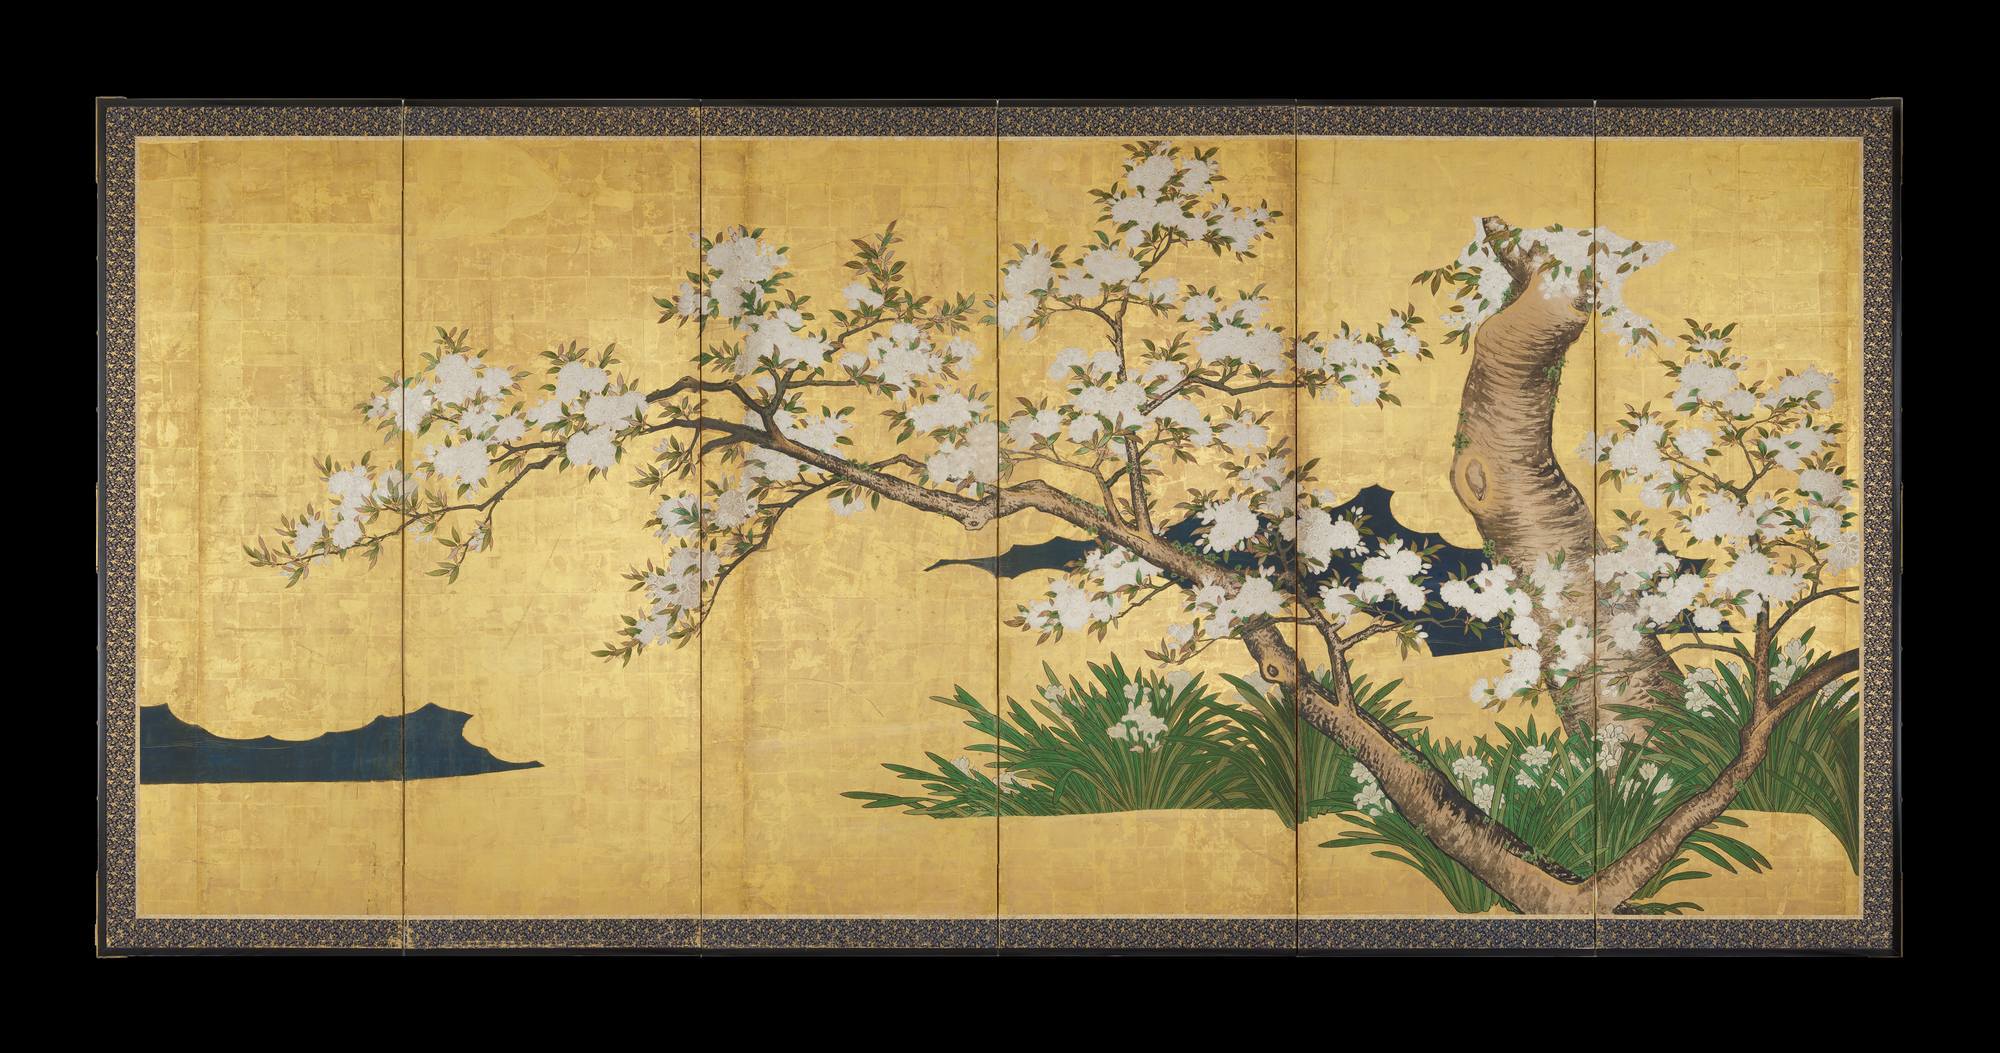 Image Credit: Cherry Trees with Narcissus, Violets, and Dandelions. Japanese, Edo Period, ca. 1600-1868. Color, Ink, and gold on paper. 63 3/4 × 140 15/16 in. (161.9 × 358 cm). Purchased with the Lillie and Roy Cullen Endowment Fund, 2020.13.a